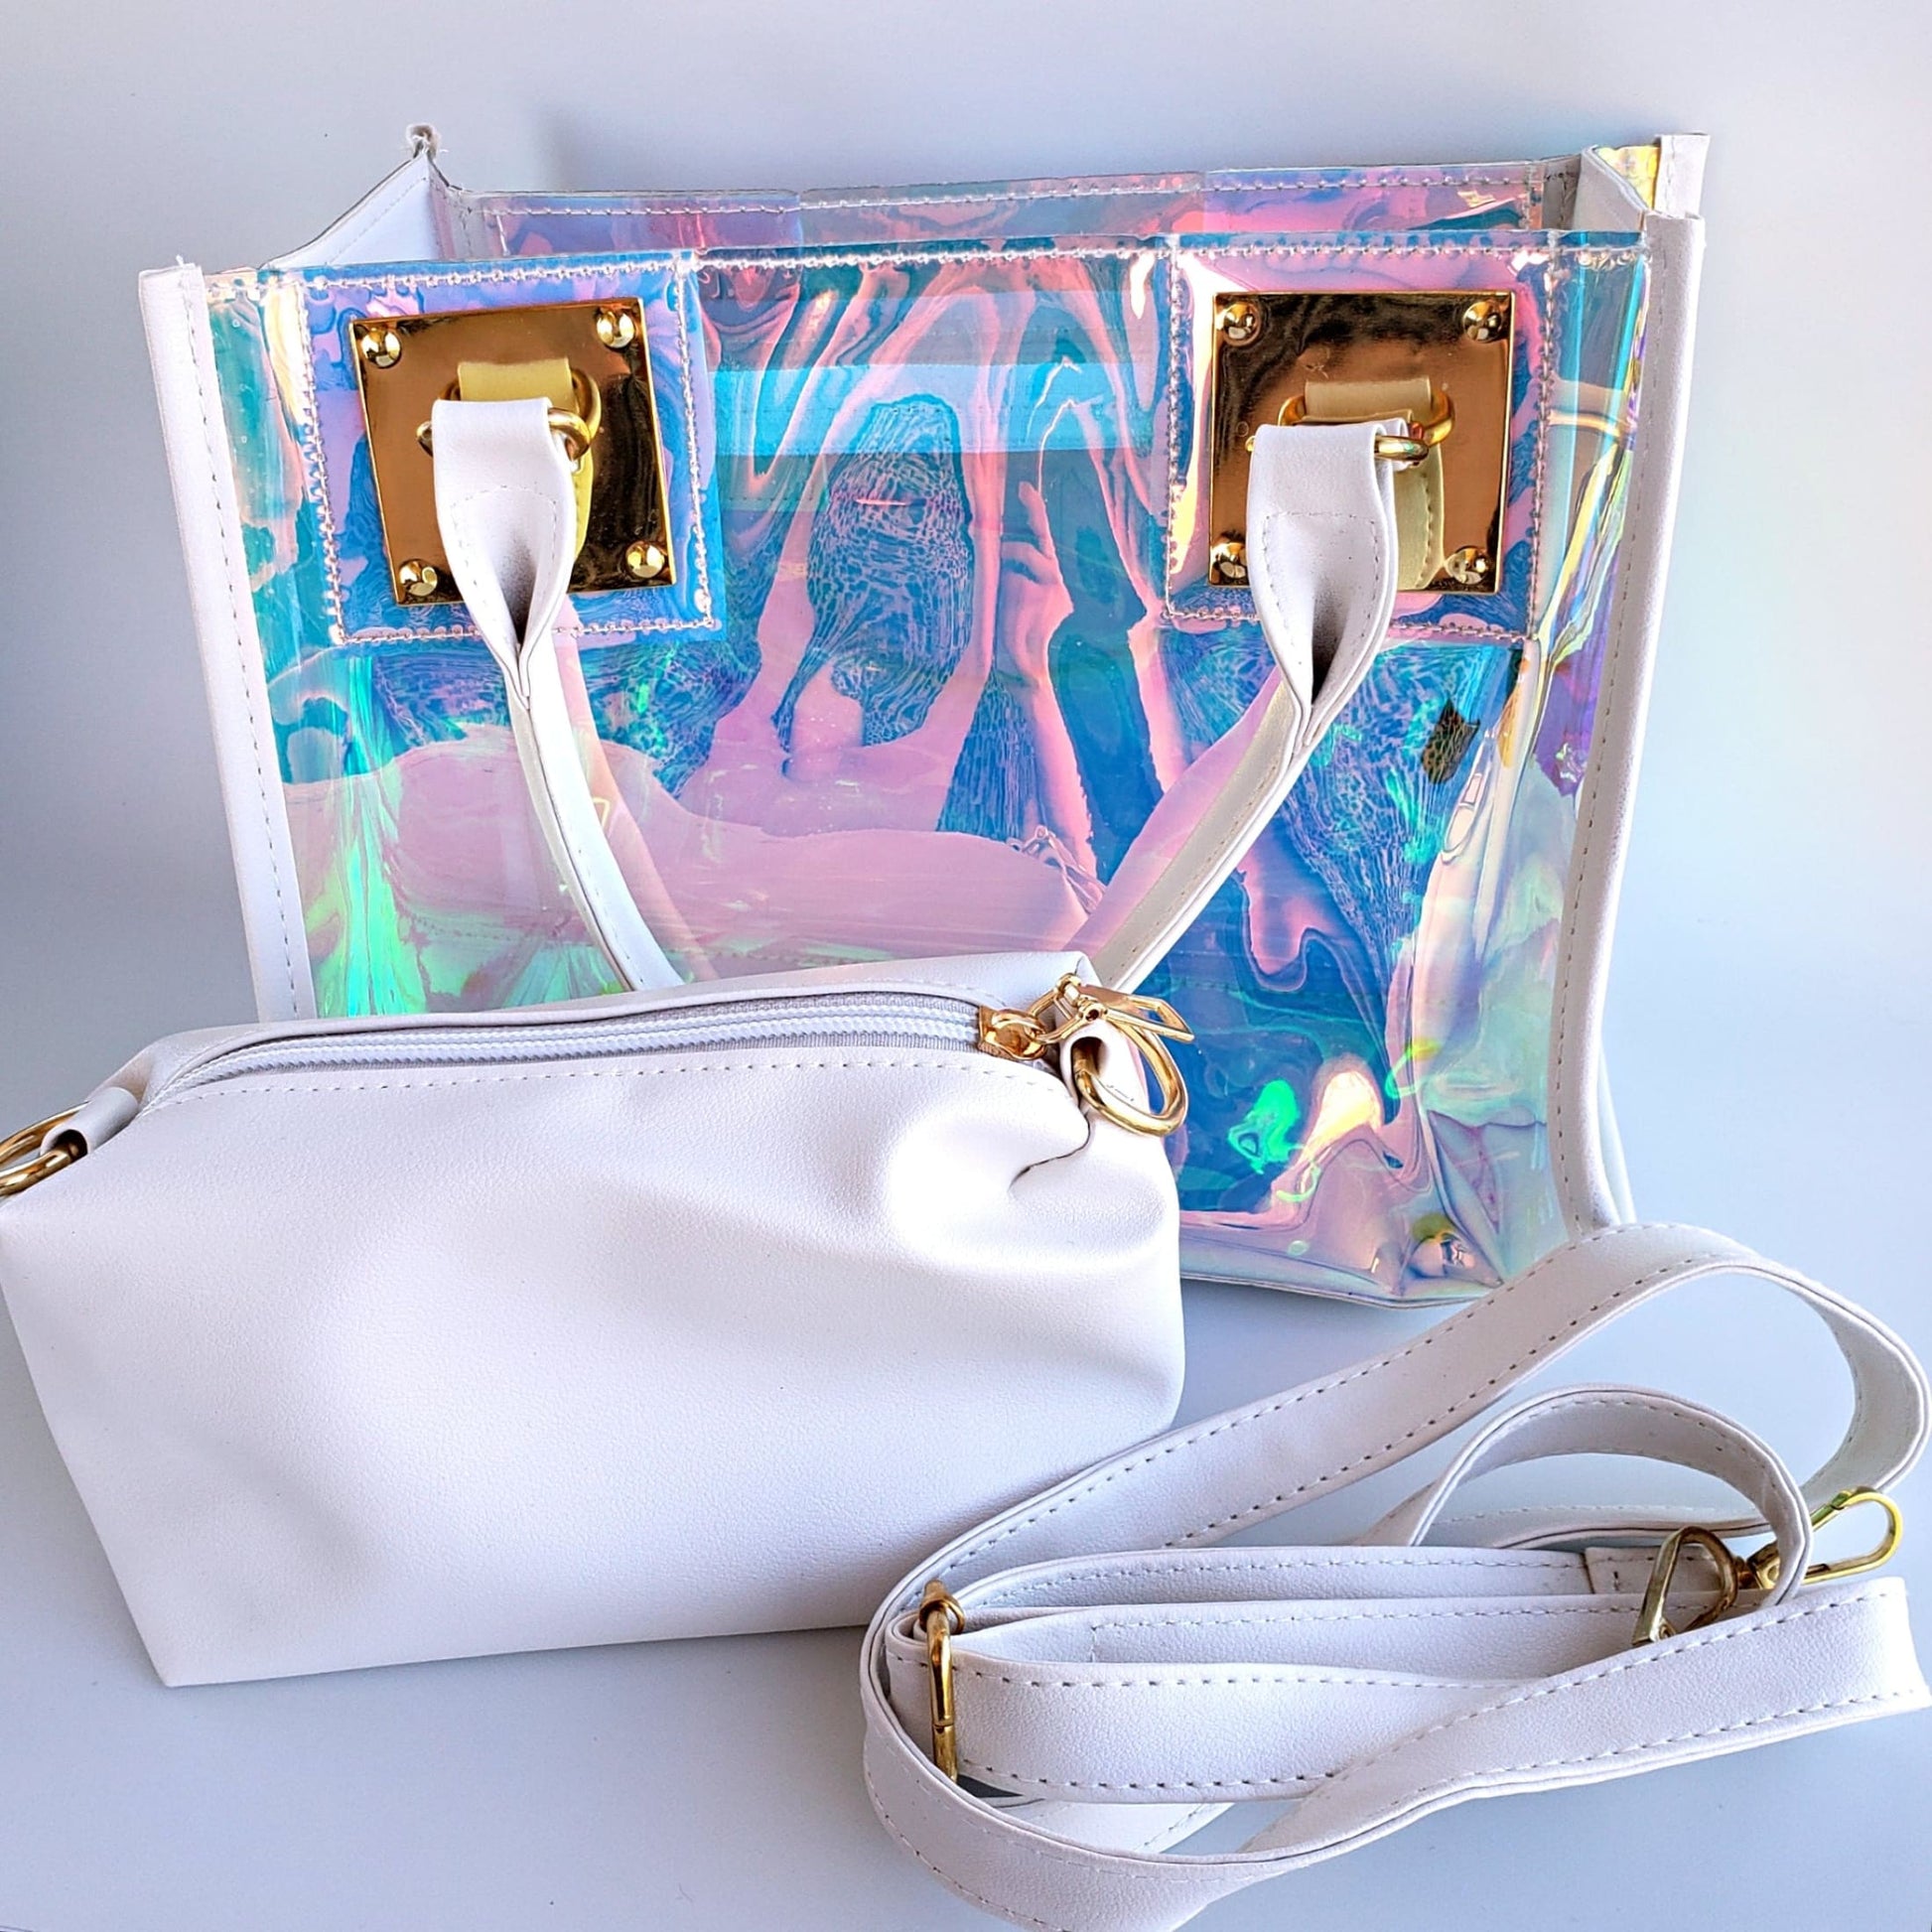 Iridescent Transparent Shoulder Bag with Gold Trim from Confetti Kitty, Only 27.99